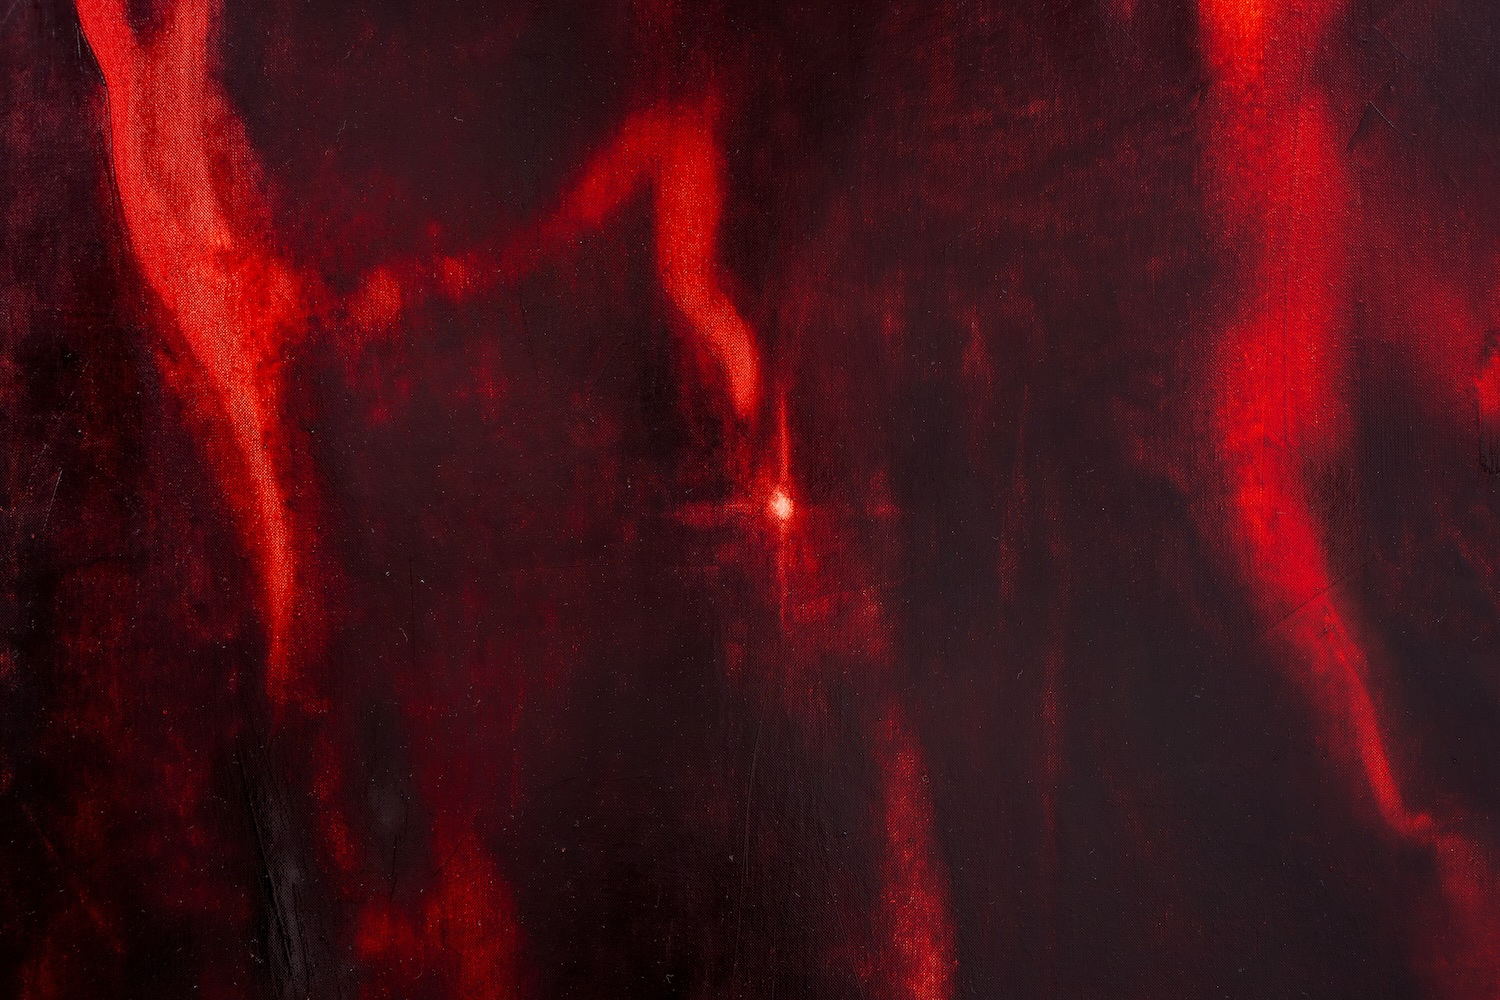 Julia Selin, 'My name is fire and my signature will dissolve into the universe', oil on canvas, 190.0 x 140.0 cm, 2024 [detail]